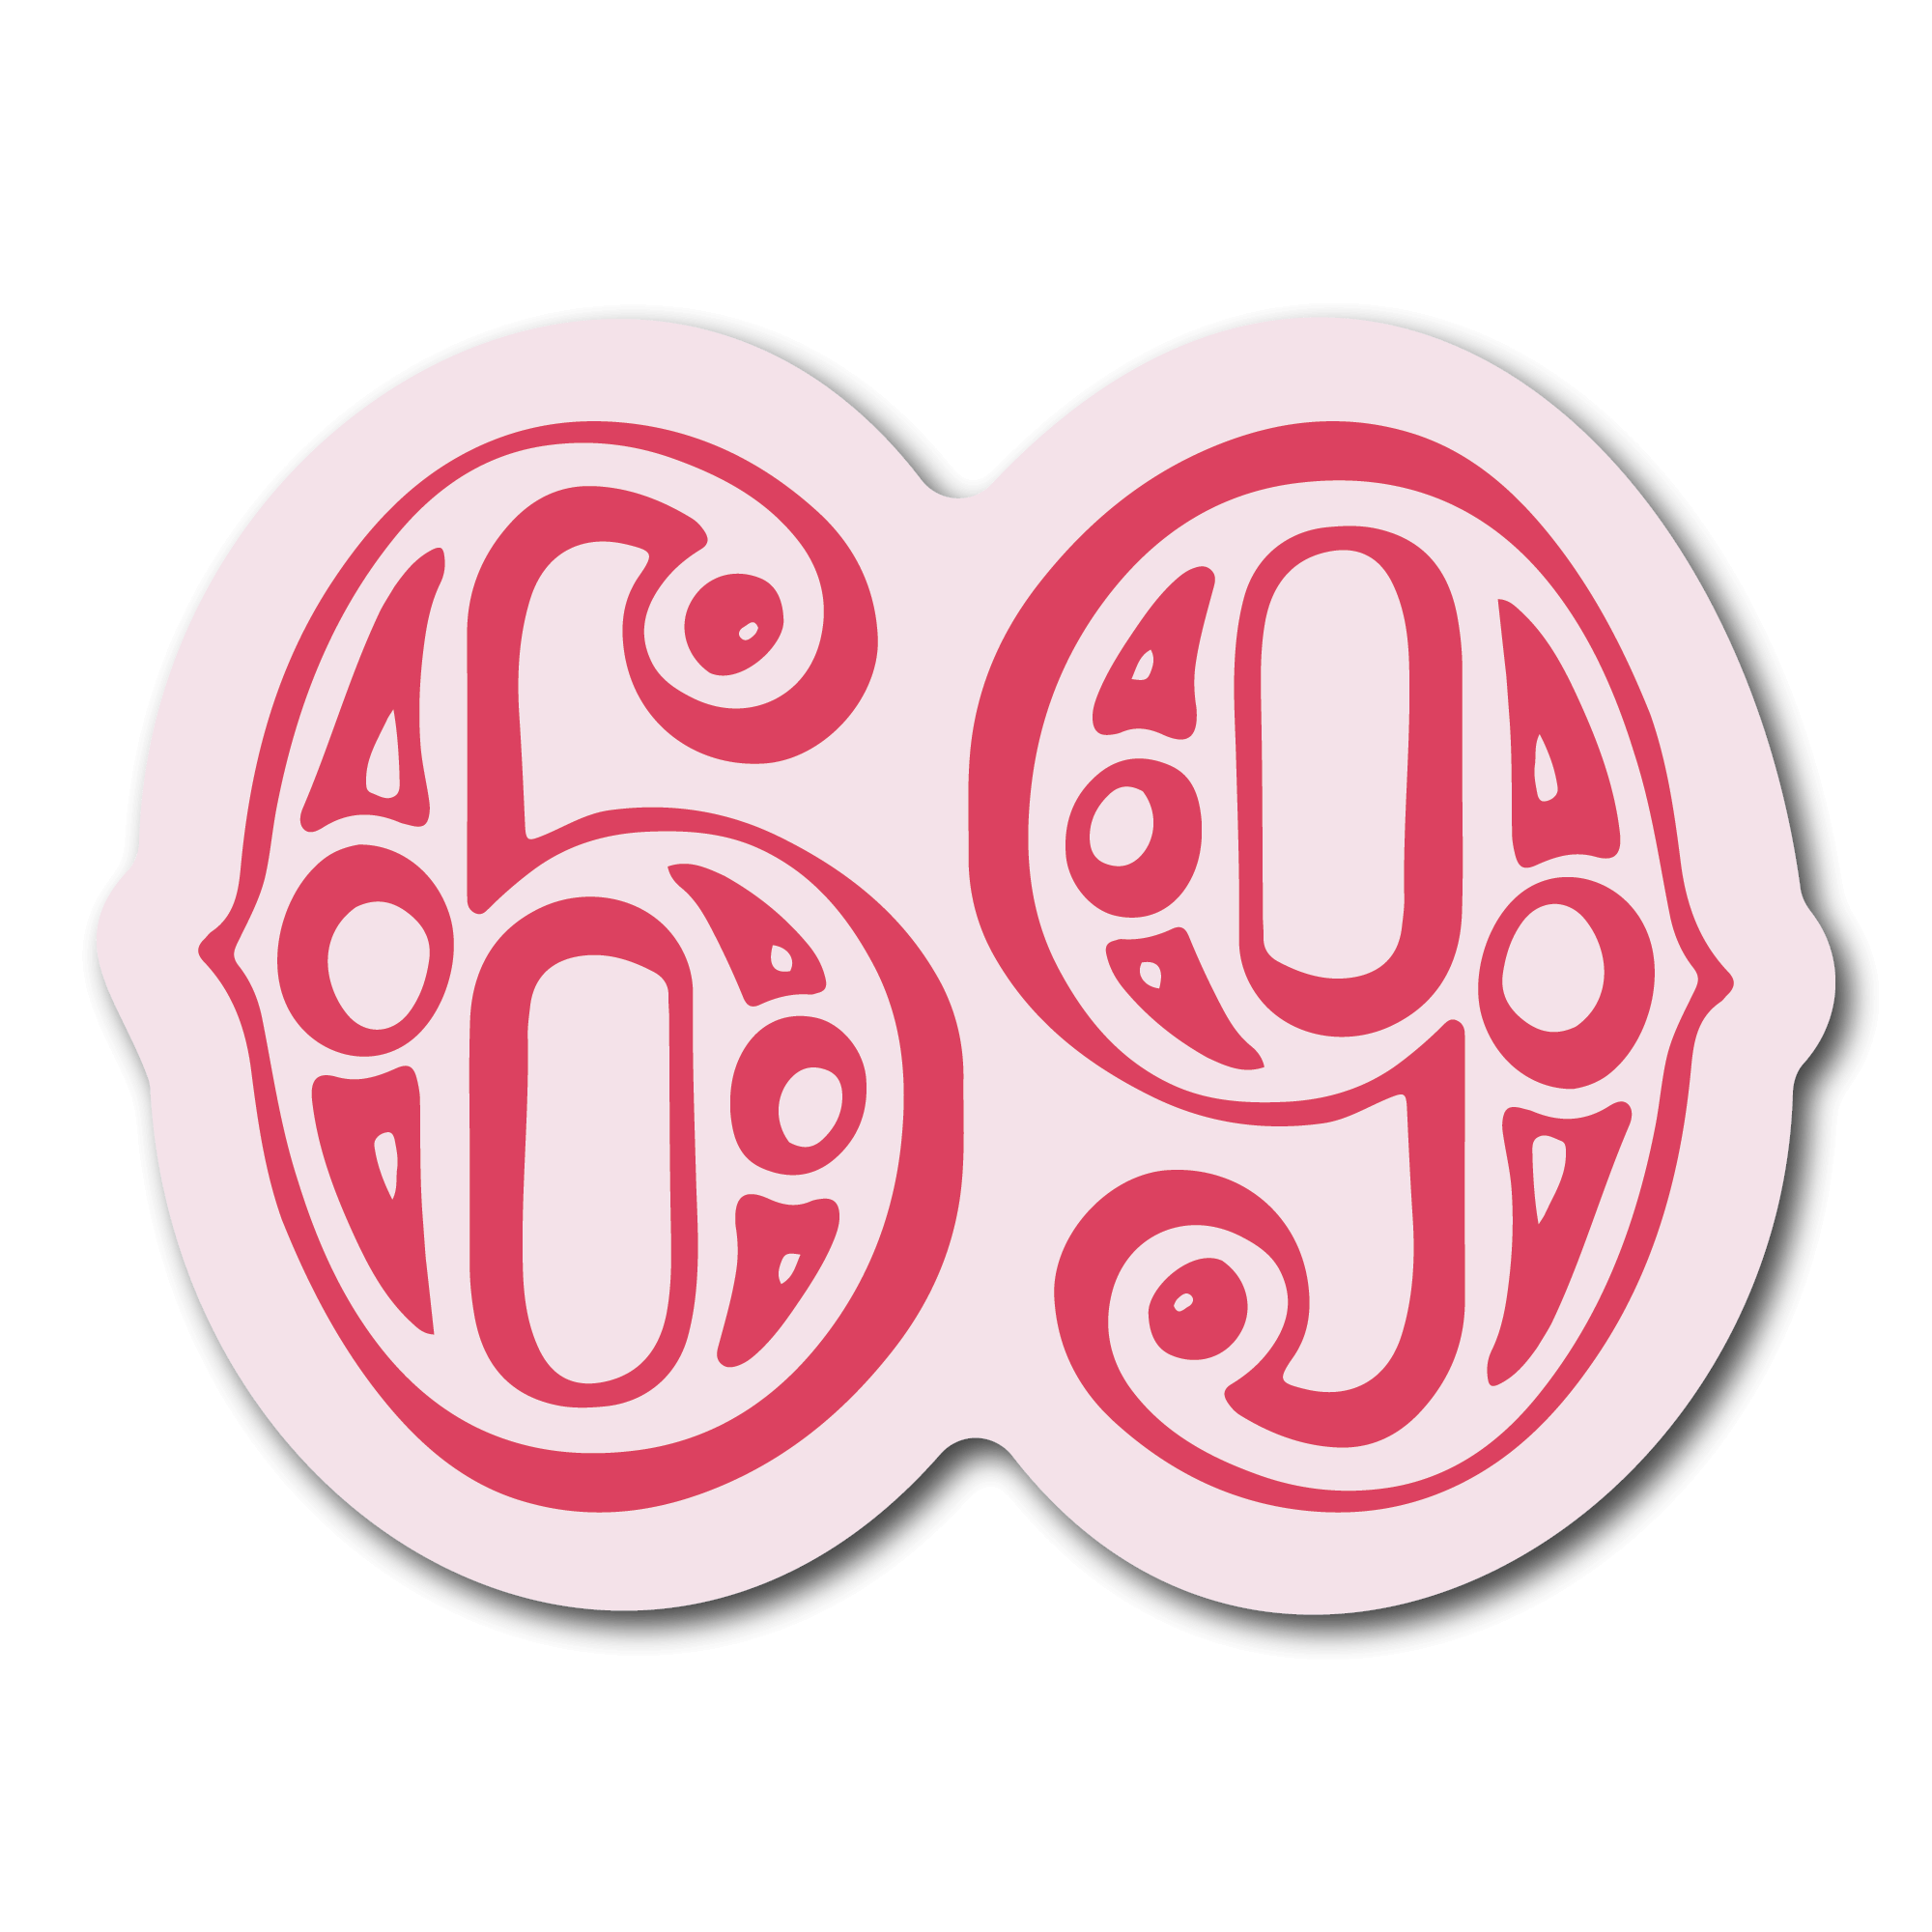 Small Pink waterproof Sticker of the number 69 for phone case or water bottle